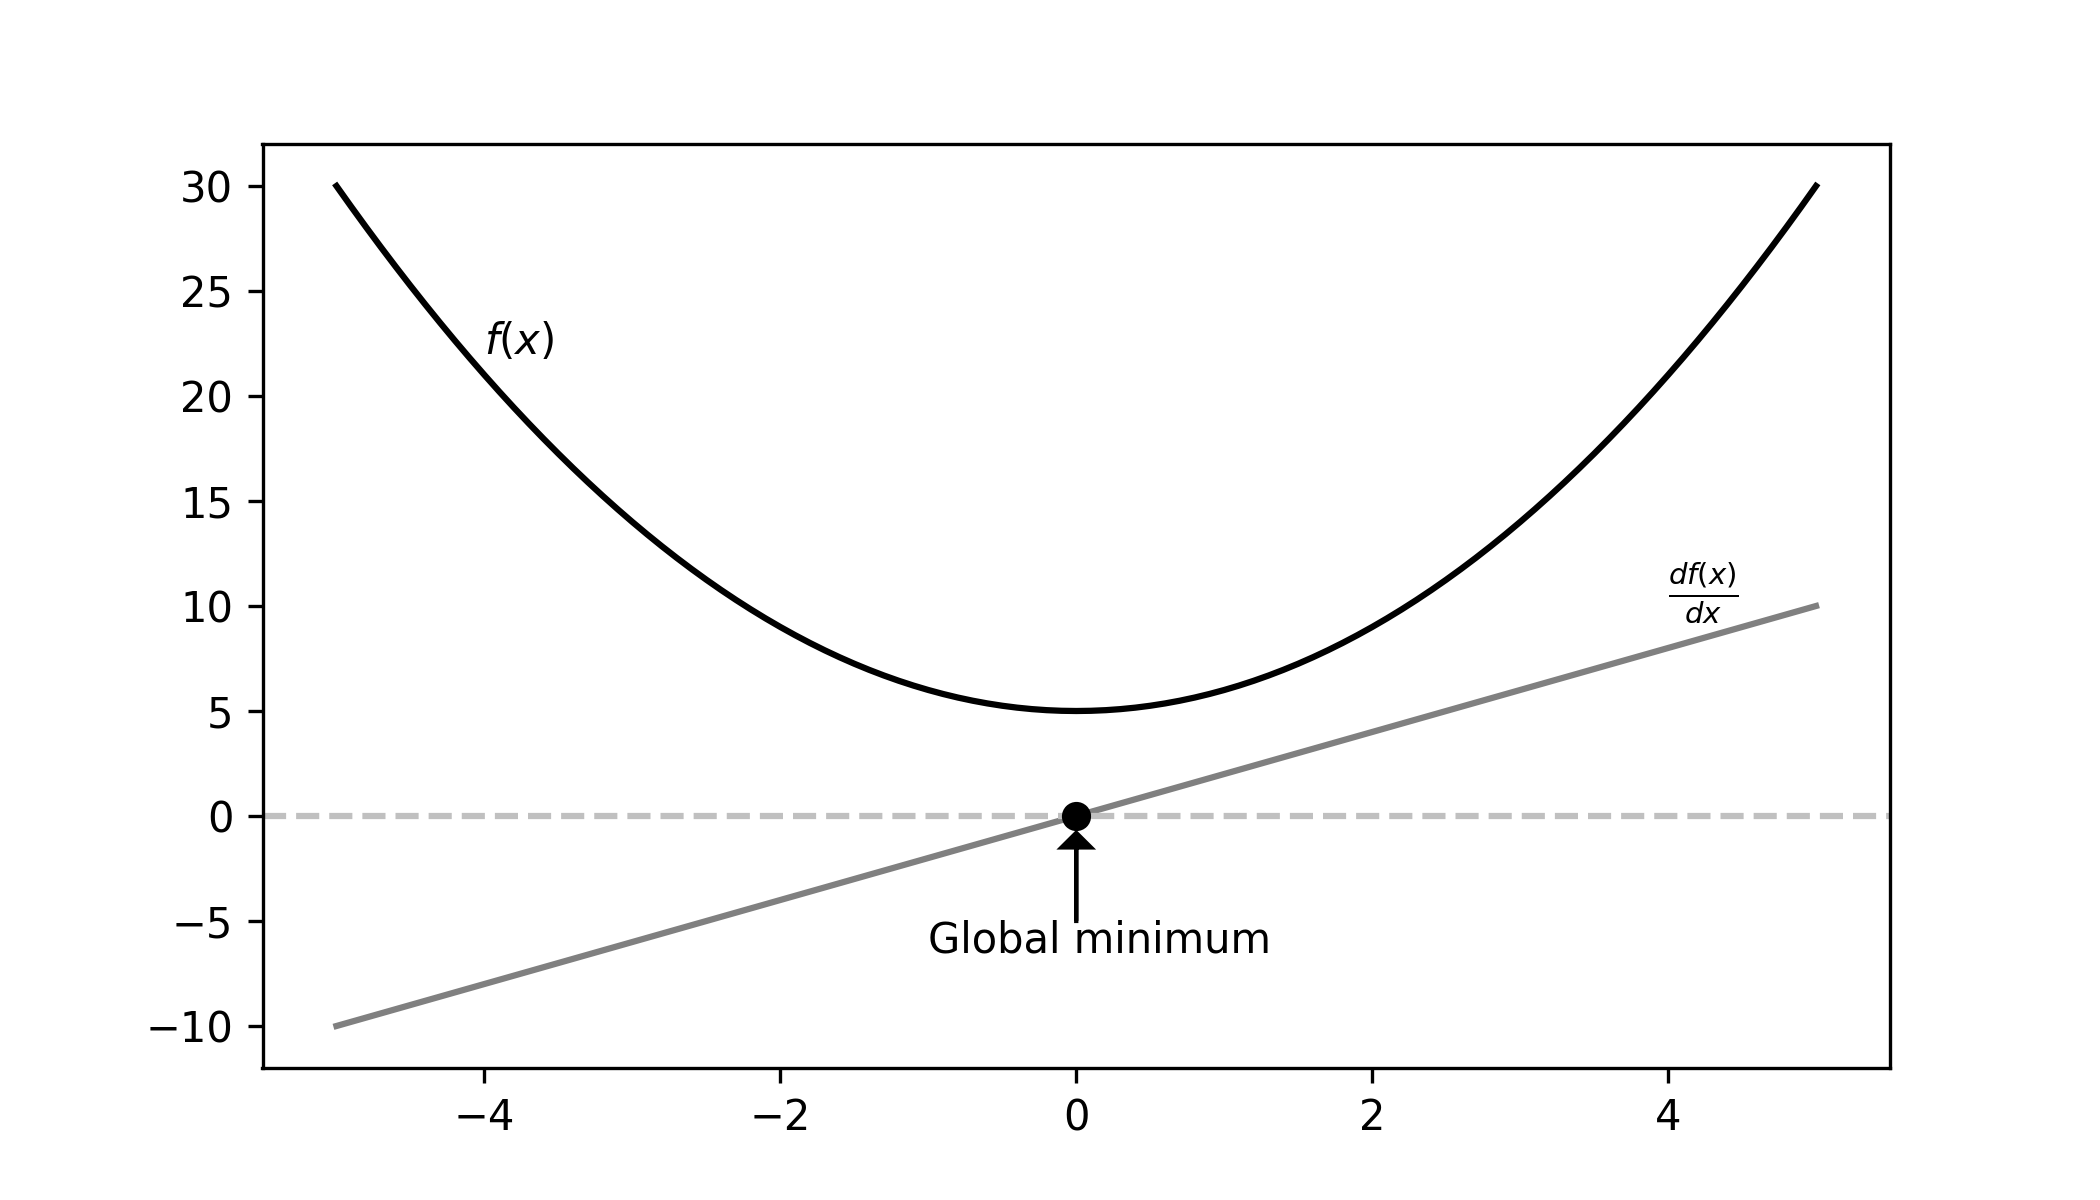 Diagram for finding the analytical global minimum